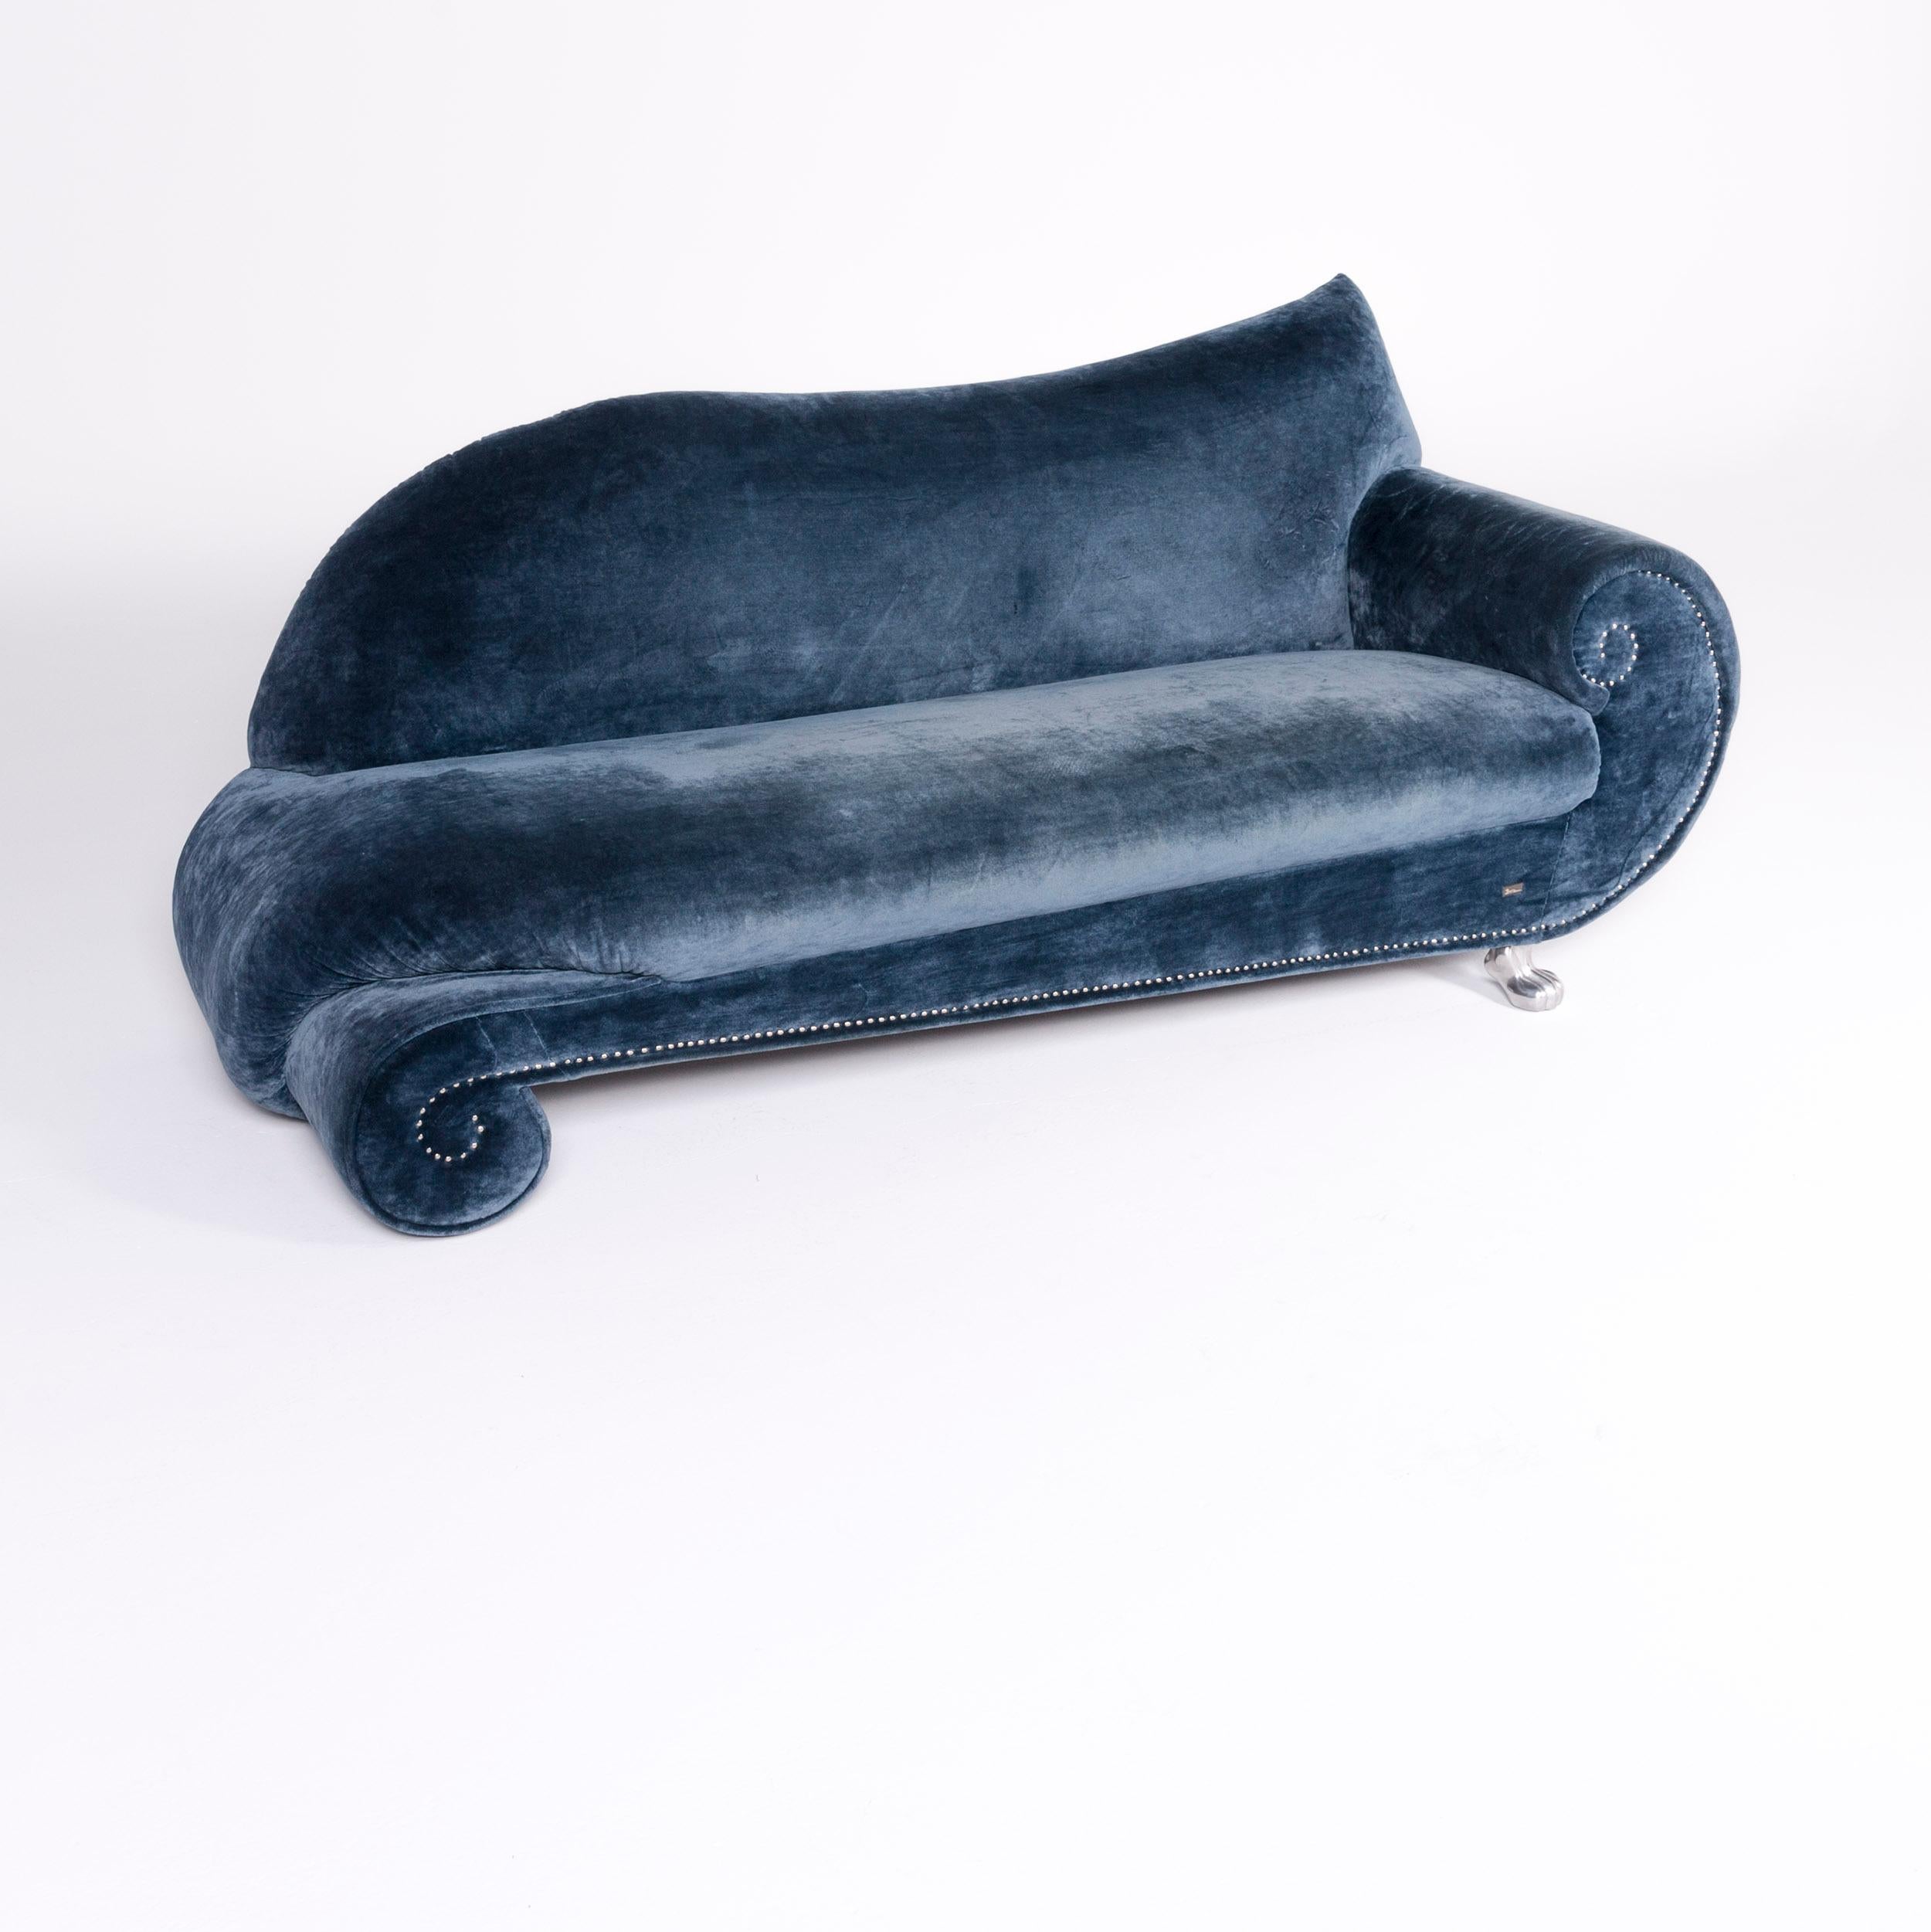 We bring to you a Bretz Gaudi designer velvet sofa blue three-seat couch récamière.
 

Product measures in centimeters:

Depth: 84
Width: 208
Height: 94
Seat-height: 47
Rest-height: 66
Seat-depth: 50
Seat-width: 147
Back-height: 36.